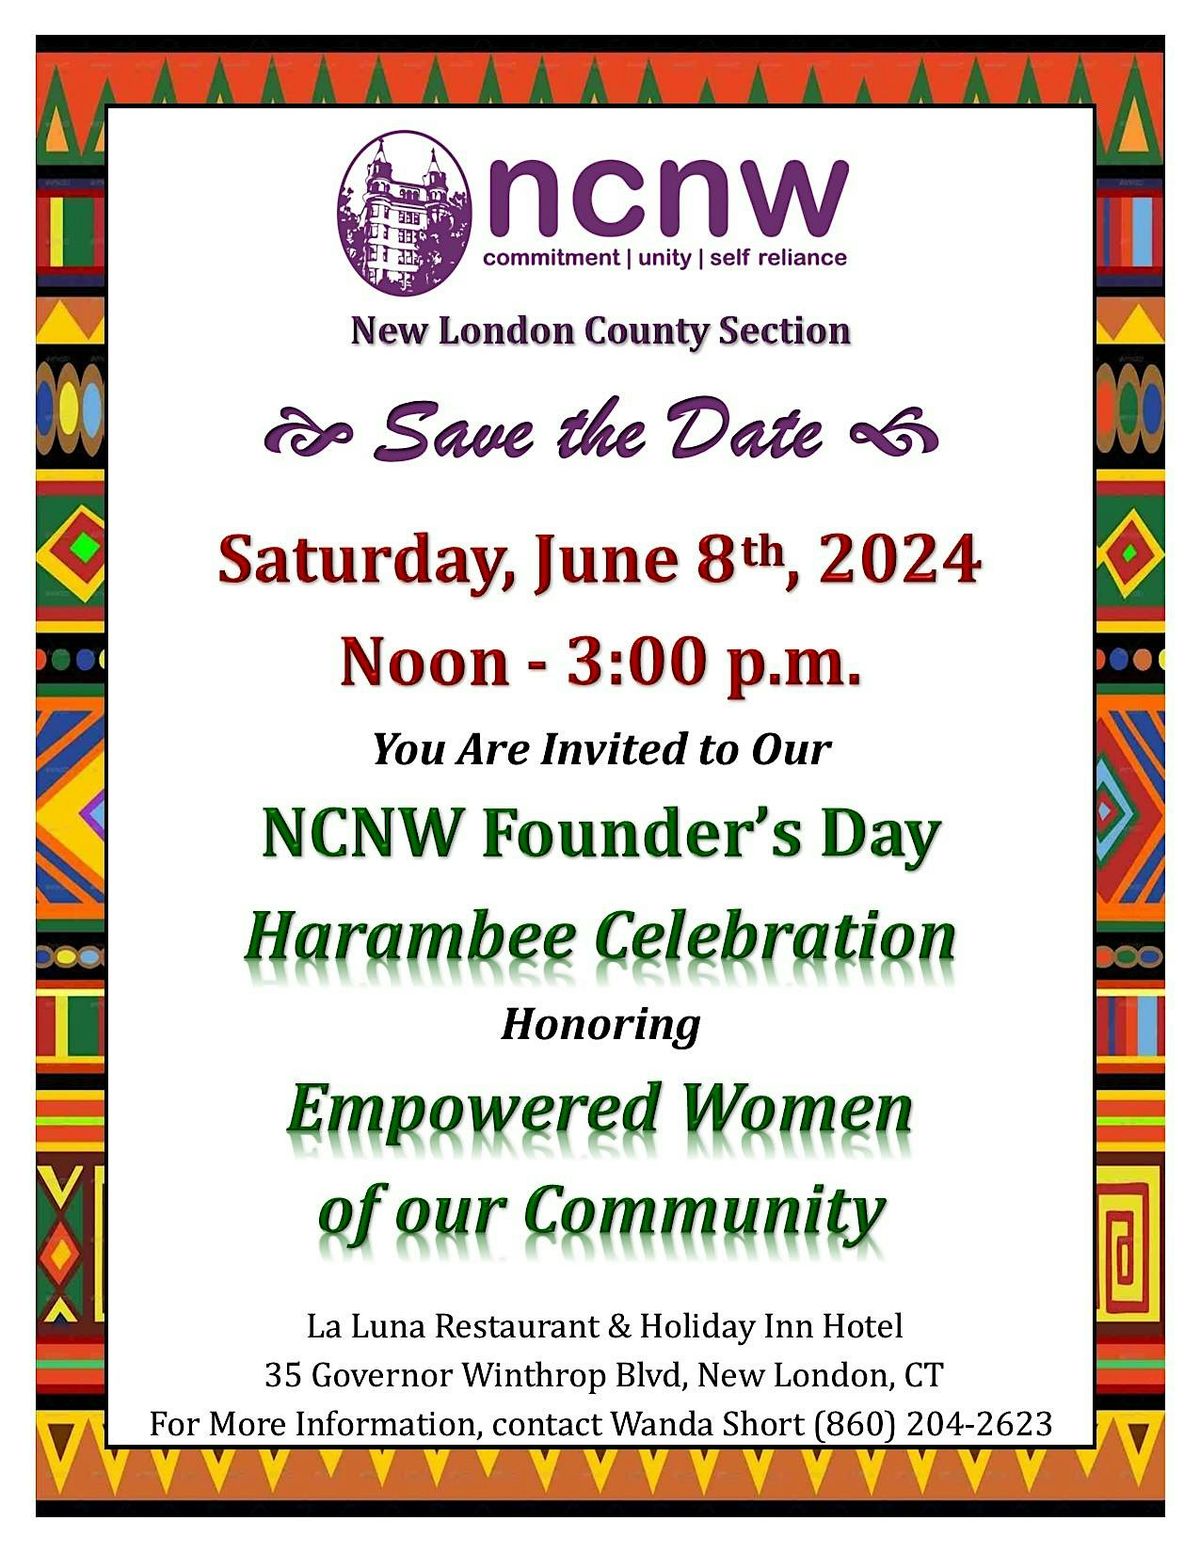 NCNW New London Founder's Day Celebration Honoring Empowered Women of Our Community